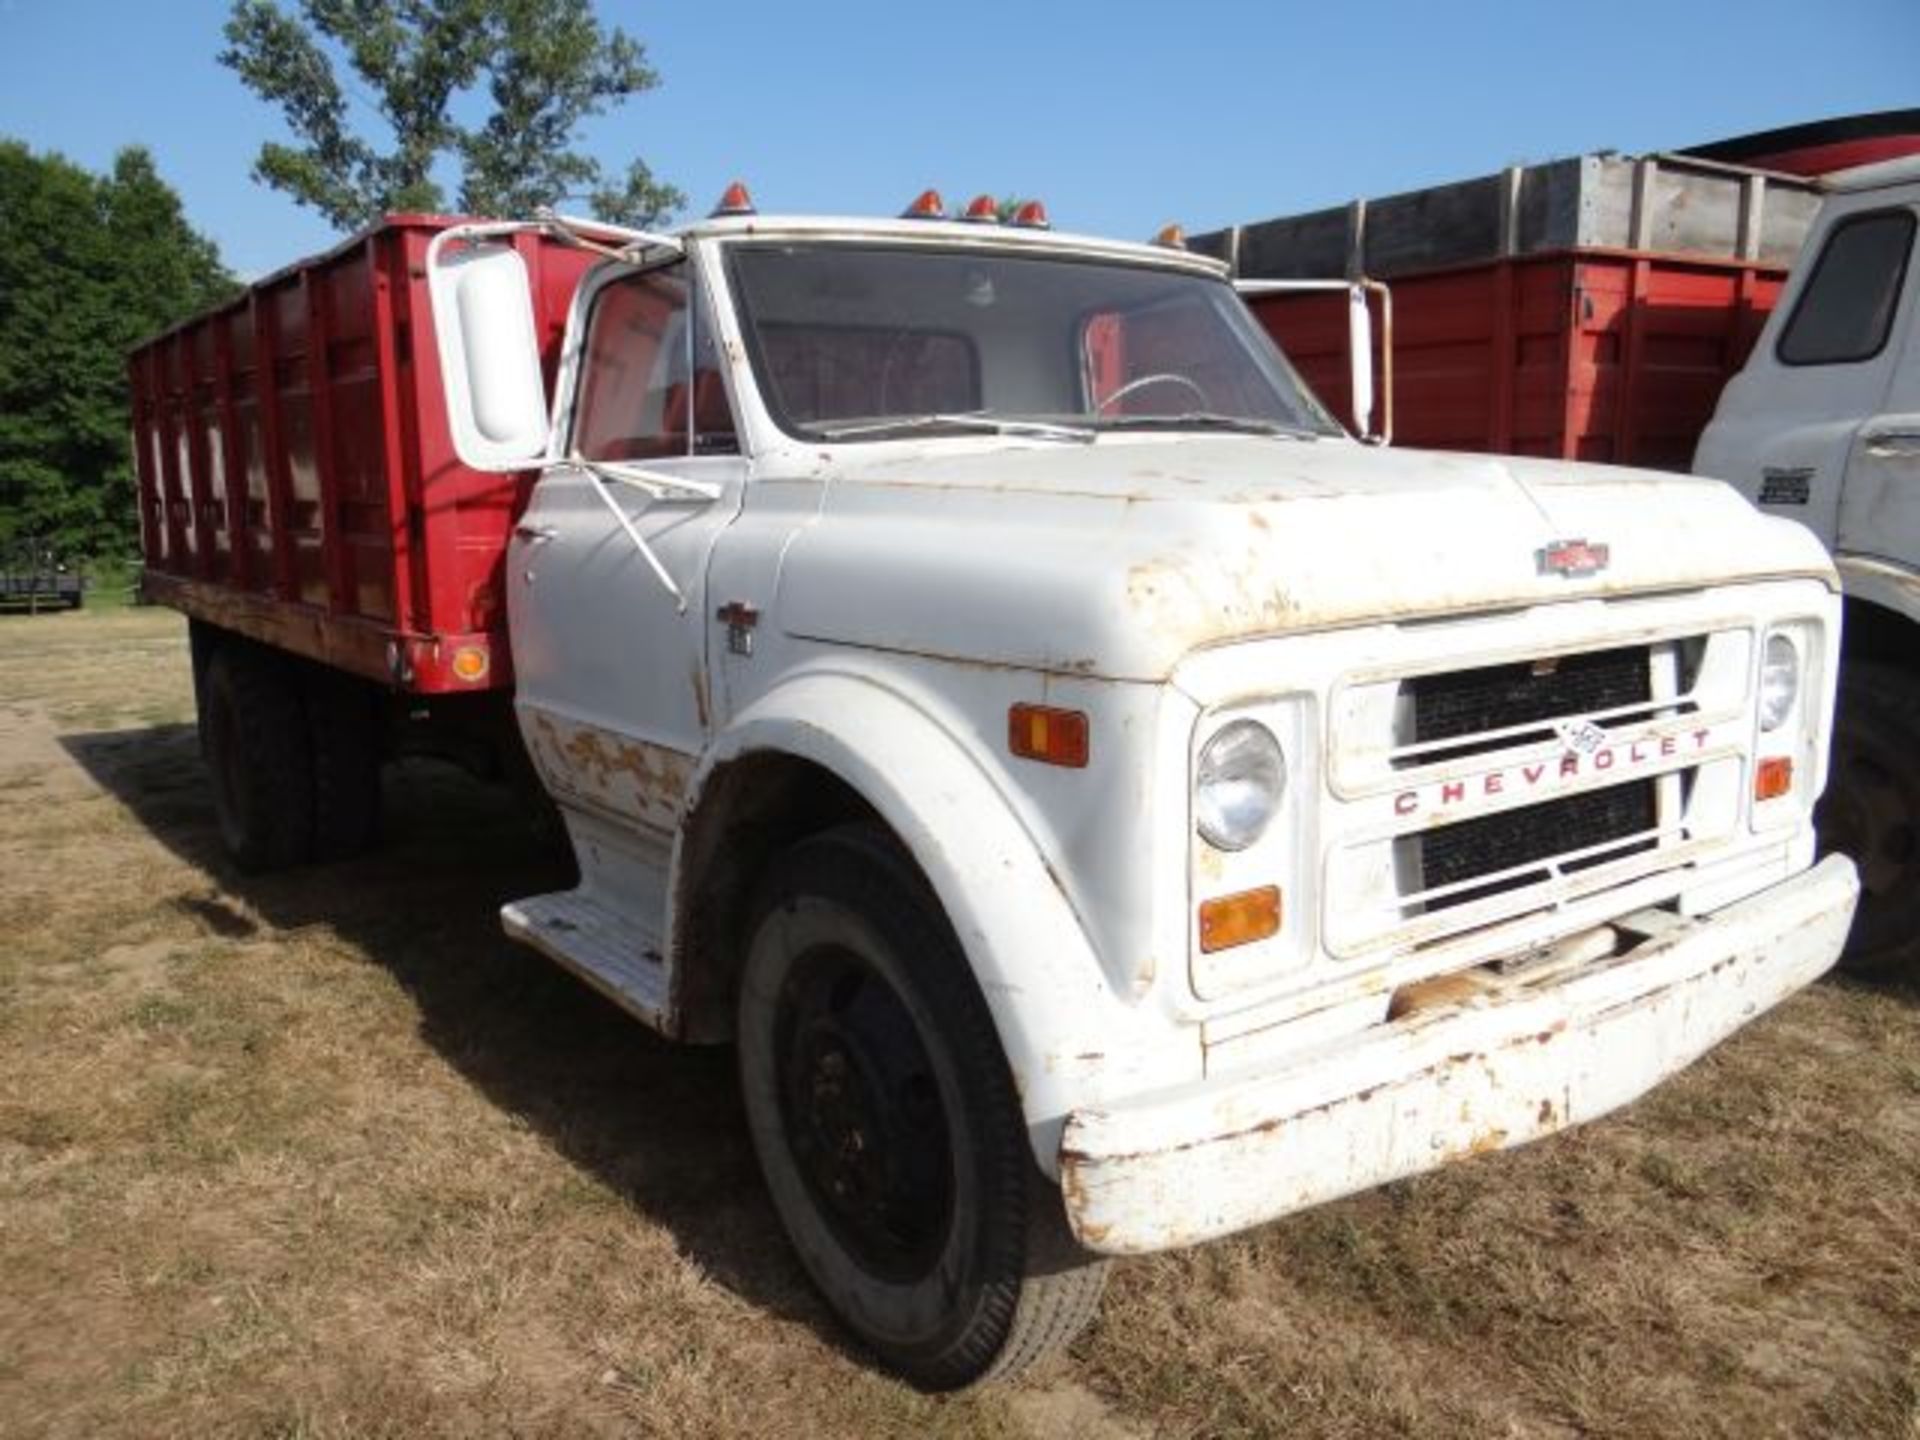 1968 Chevy C50 Grain Truck 8cyl, Gas, 4&2, 15' Knapheide Bed, Hoist Works, Title in the Office - Image 2 of 4